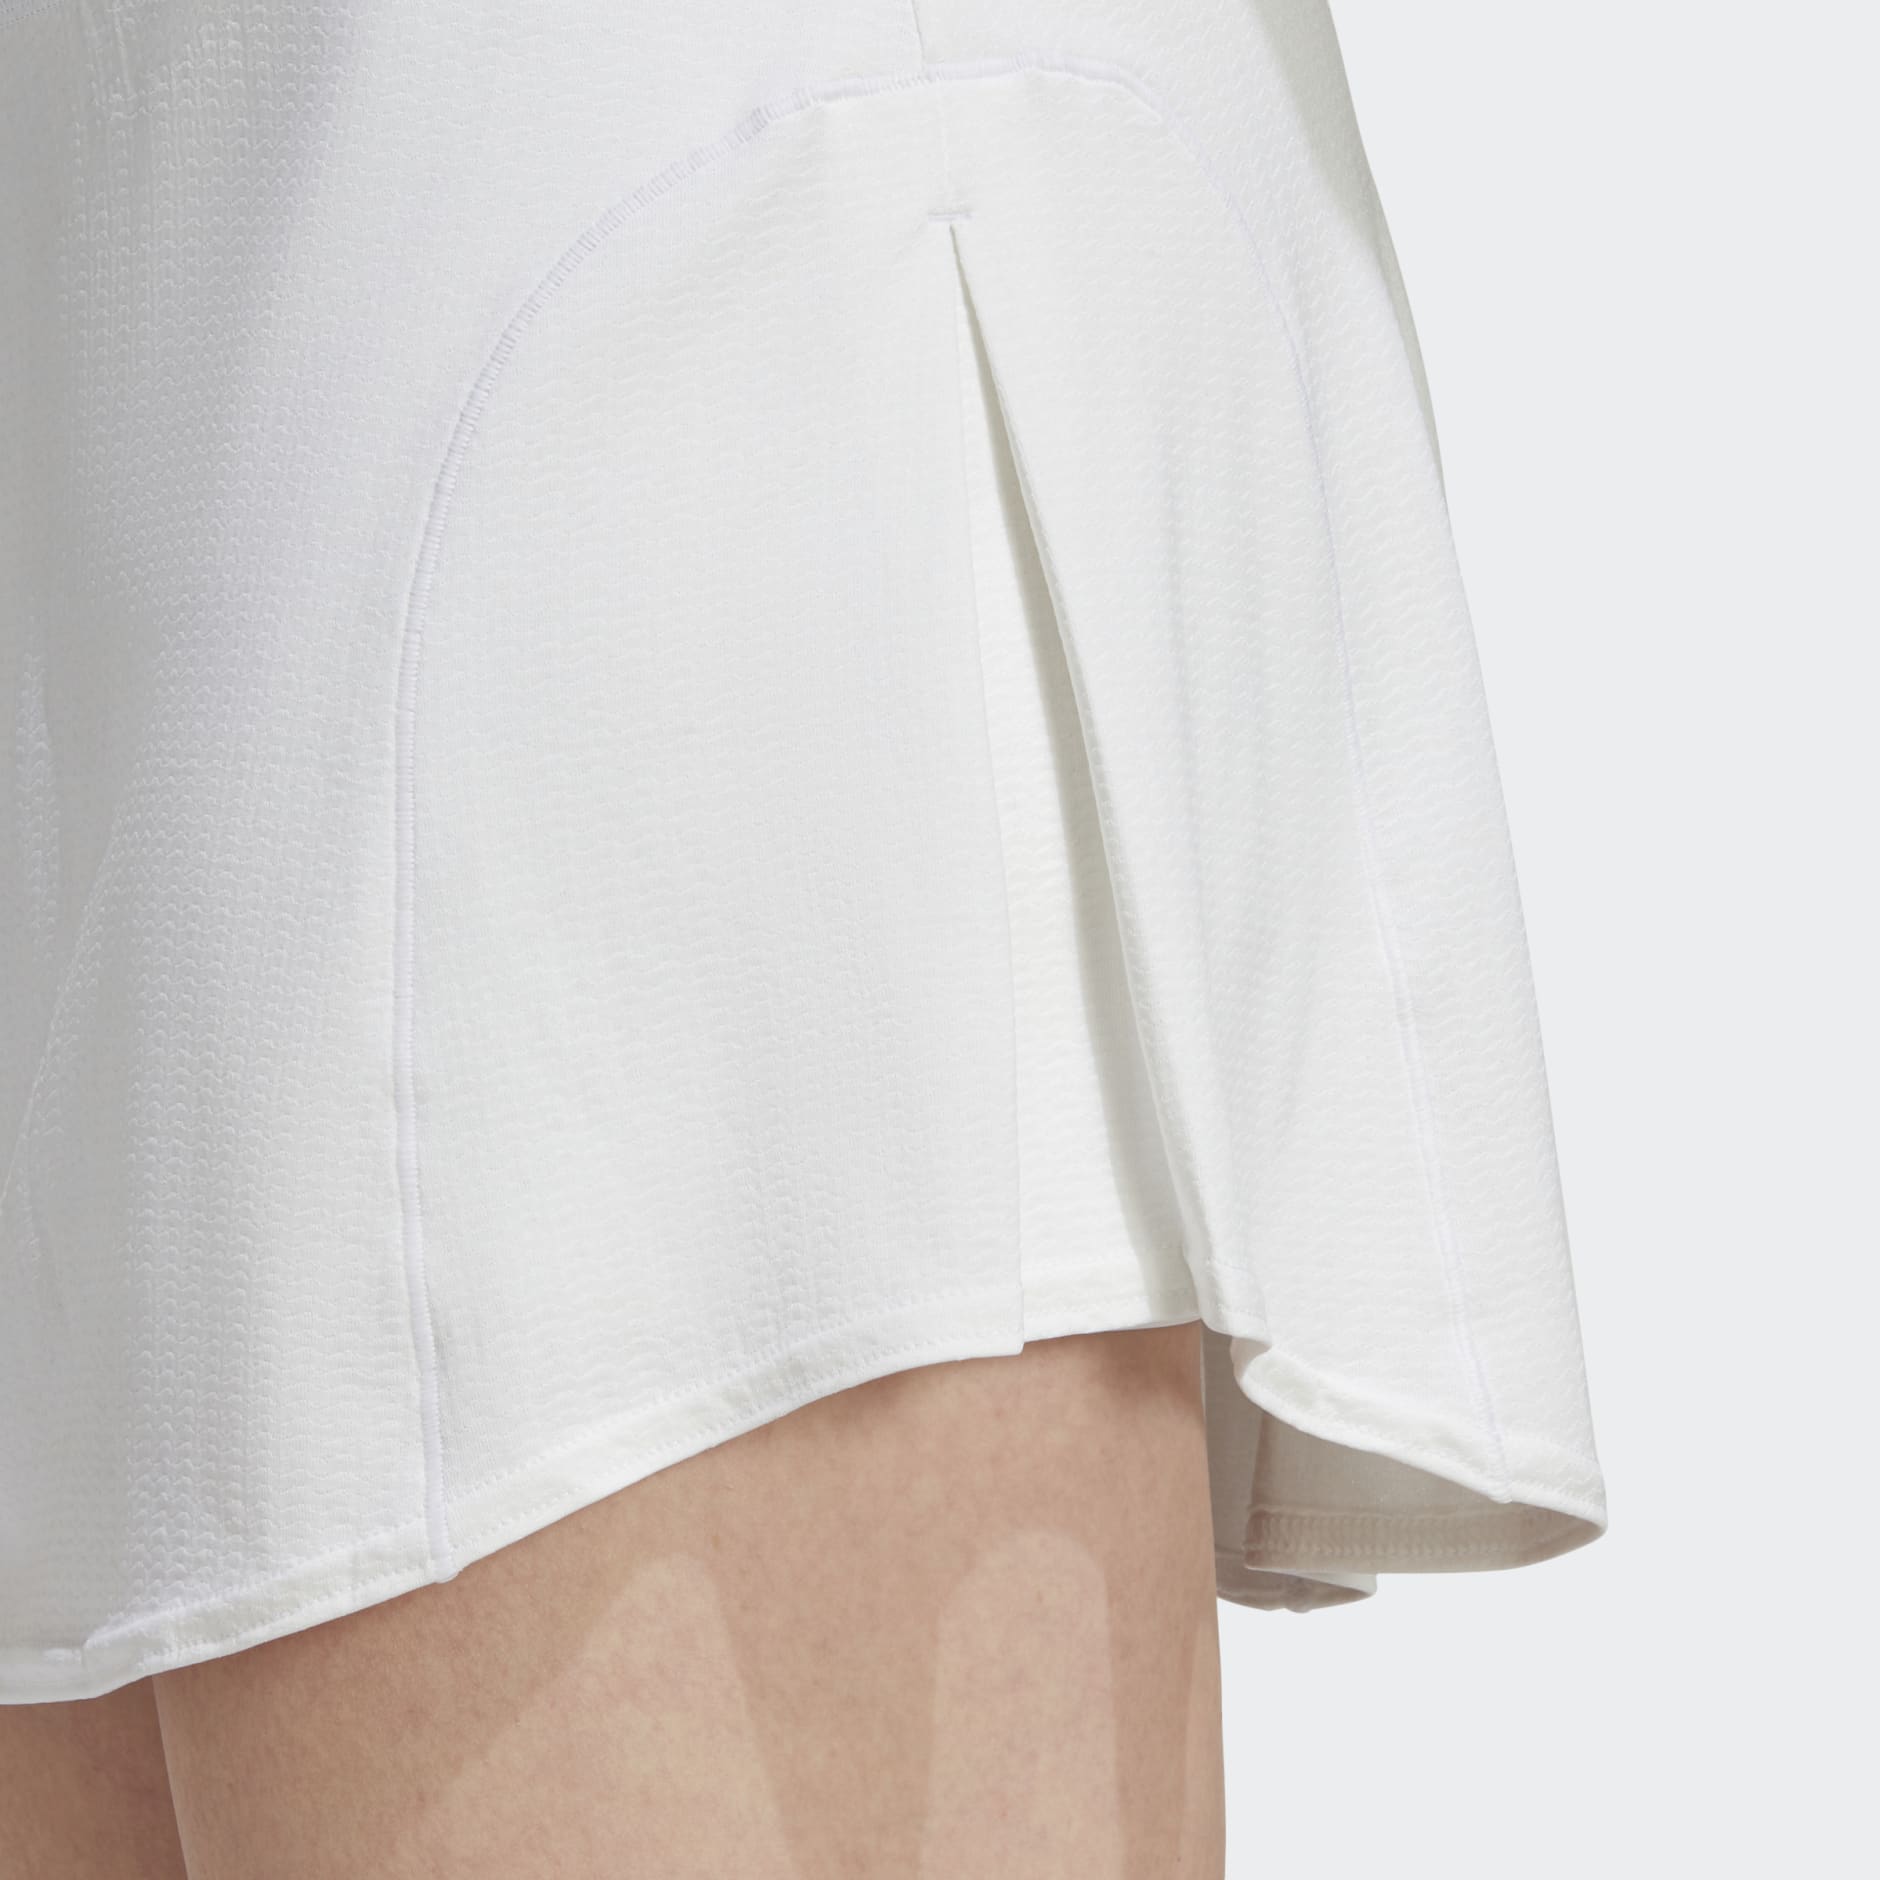 Clothing - Tennis Match Skirt - White | adidas South Africa